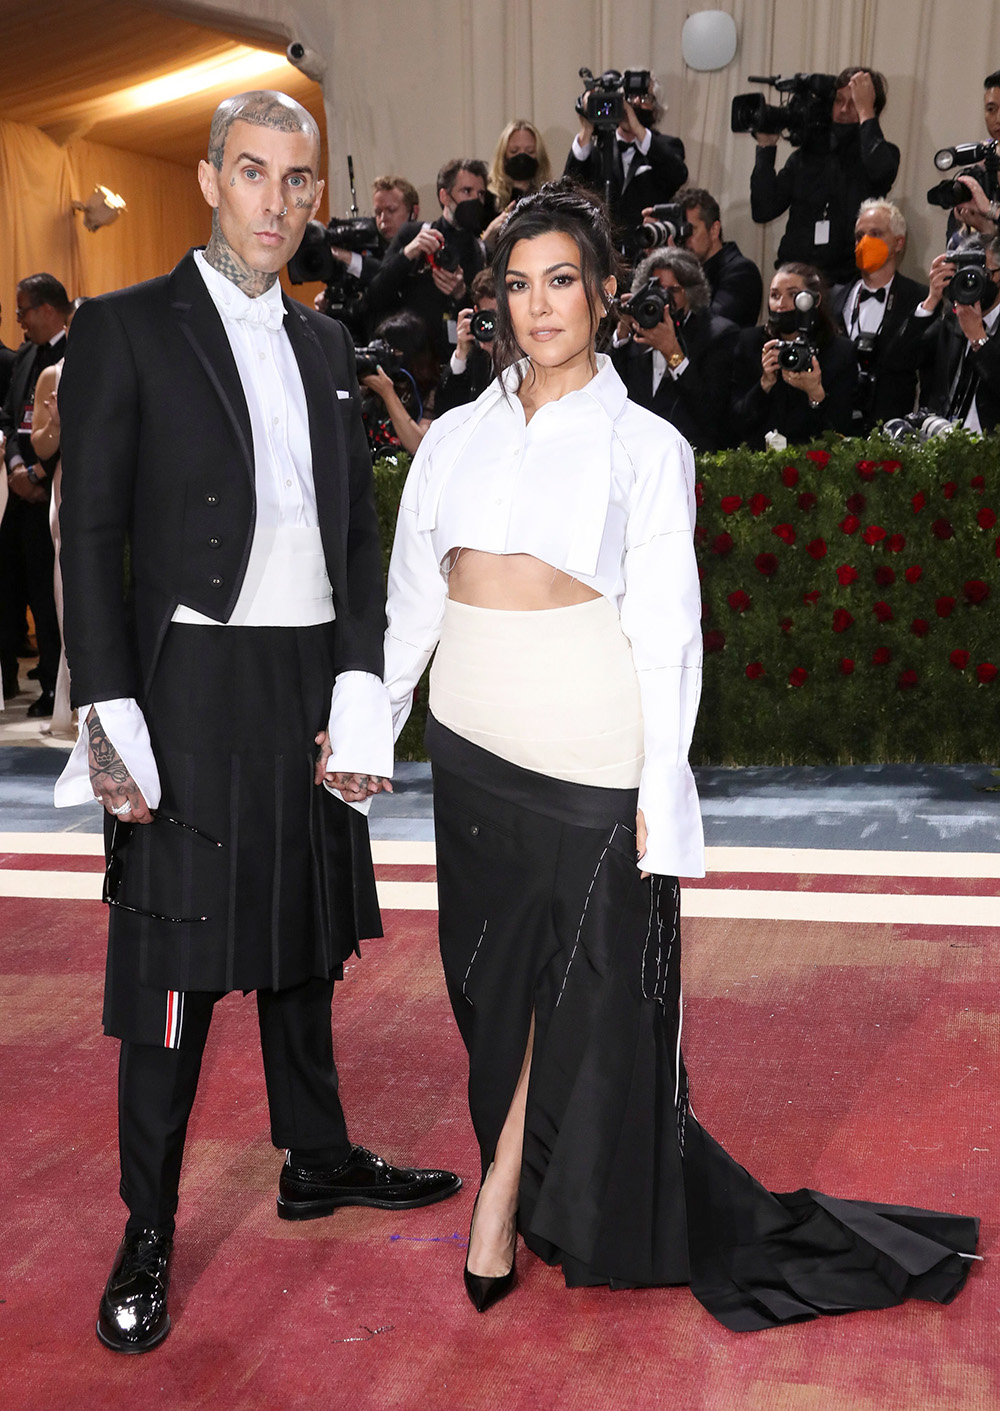 Travis Barker and Kourtney Kardashian
Costume Institute Benefit celebrating the opening of In America: An Anthology of Fashion, Arrivals, The Metropolitan Museum of Art, New York, USA - 02 May 2022